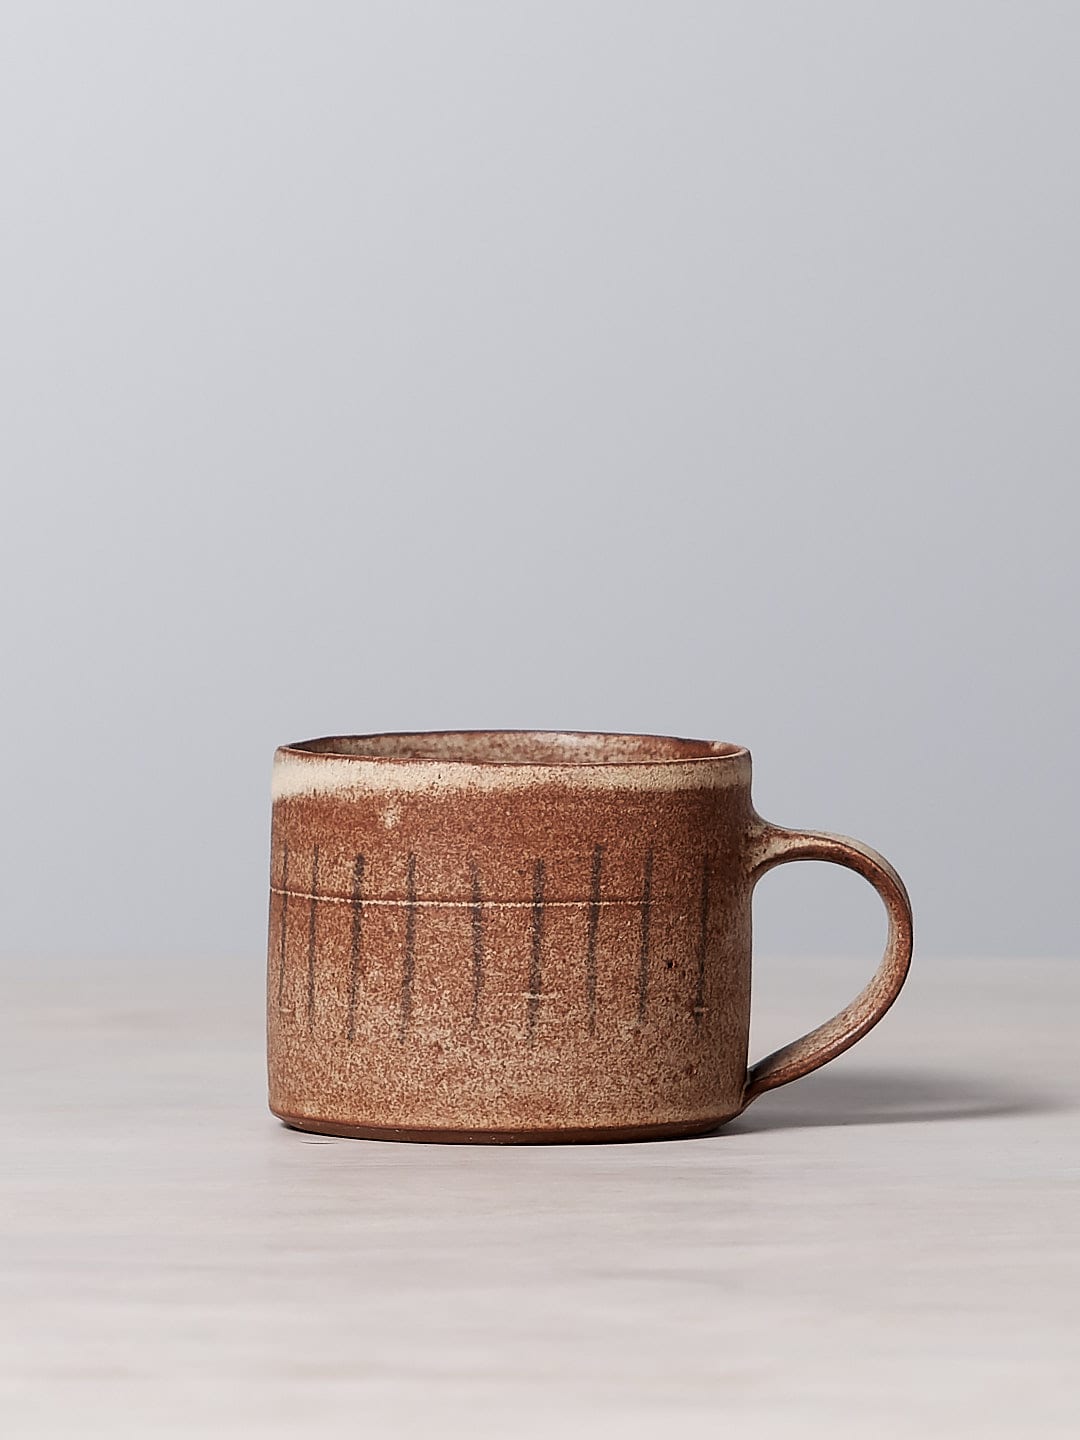 A small brown Zoë Isaacs mug made of iron-rich clay, with a matte cream glaze. This dishwasher safe Stripes mug is sitting on a table.